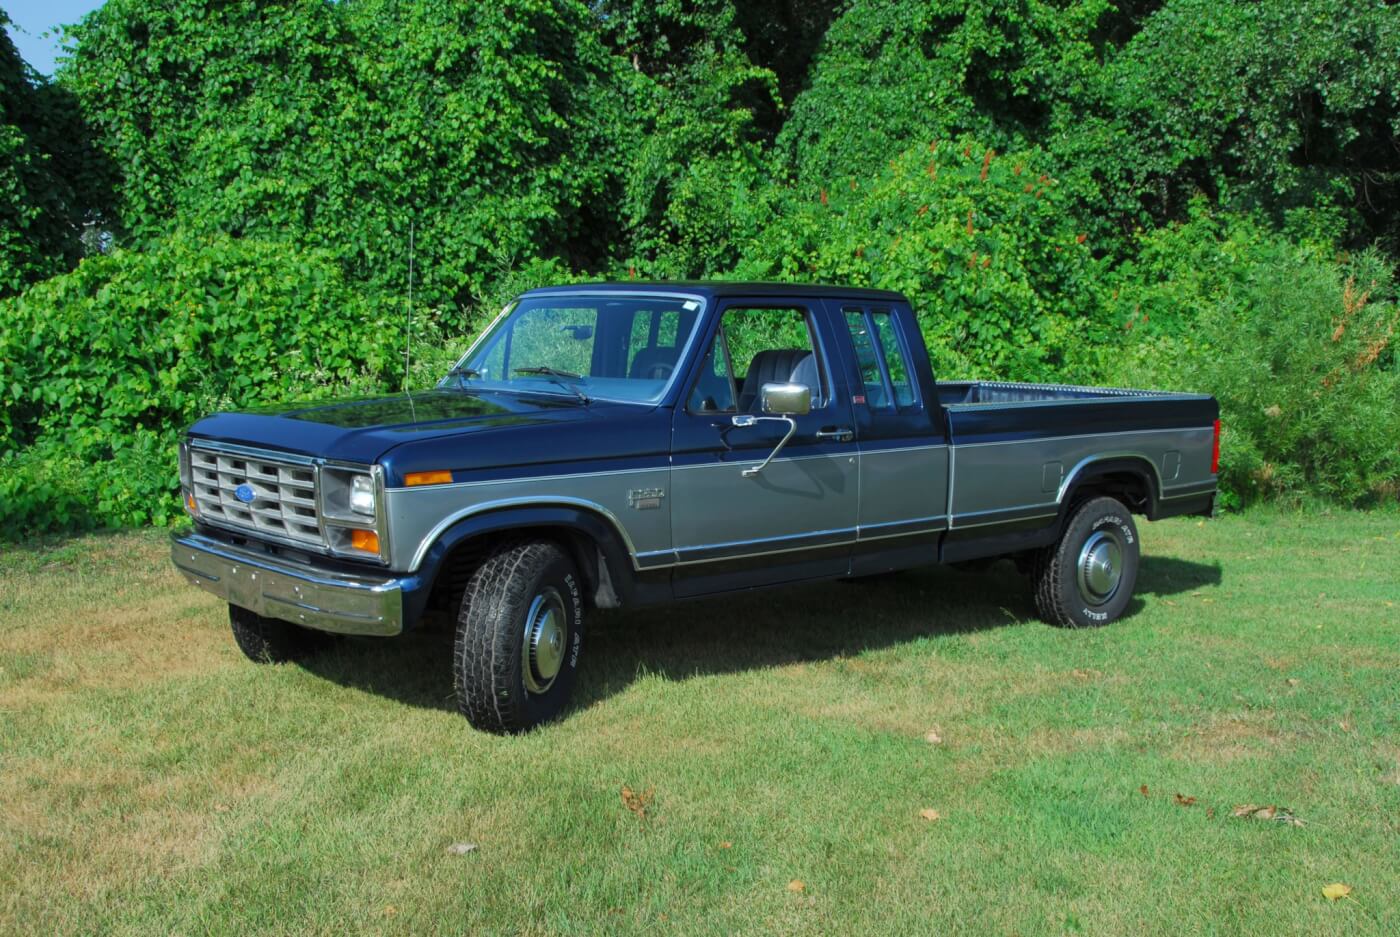 Top of the line was XLT, to which “Lariat” was added. Shown here is Frank Butt’s 1986 F-250HD 4x2 SuperCab, bought new by him in 1986. Besides the Regular Cab longbed and the SuperCab, Ford offered a Crew Cab version.